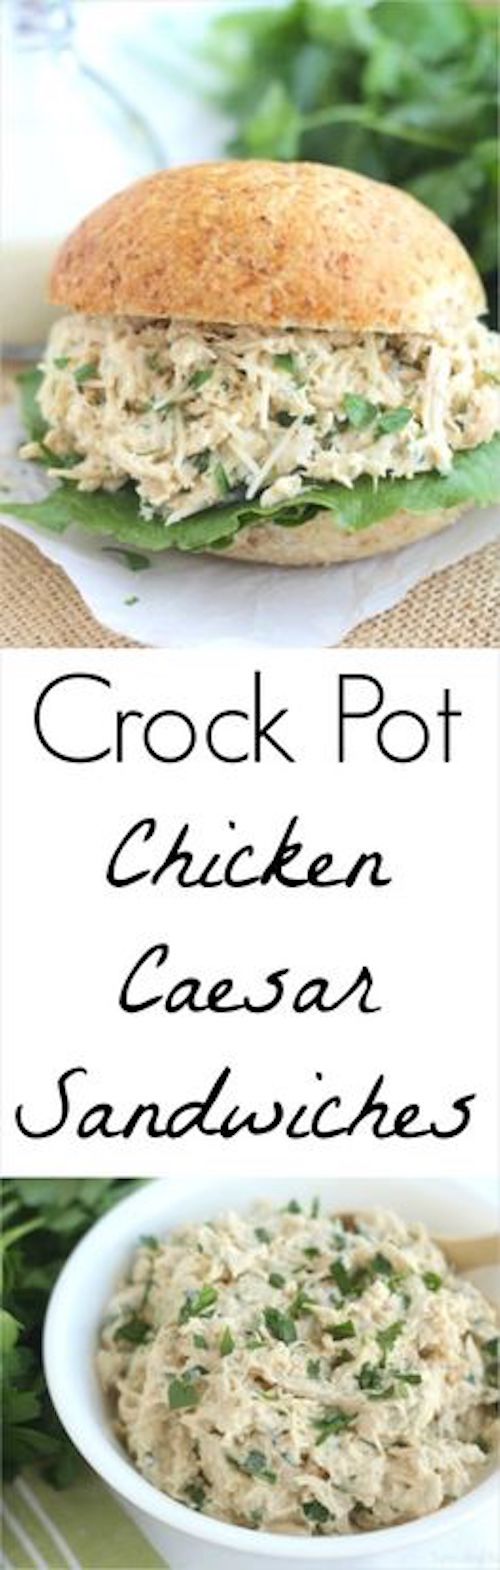 Crock Pot Chicken Caesar Sandwiches - These easy Crock Pot Chicken Caesar Sandwiches are so quick and easy! The perfect keep-the-kitchen-cool summer dinner! Packed with protein, healthy and delicious. 